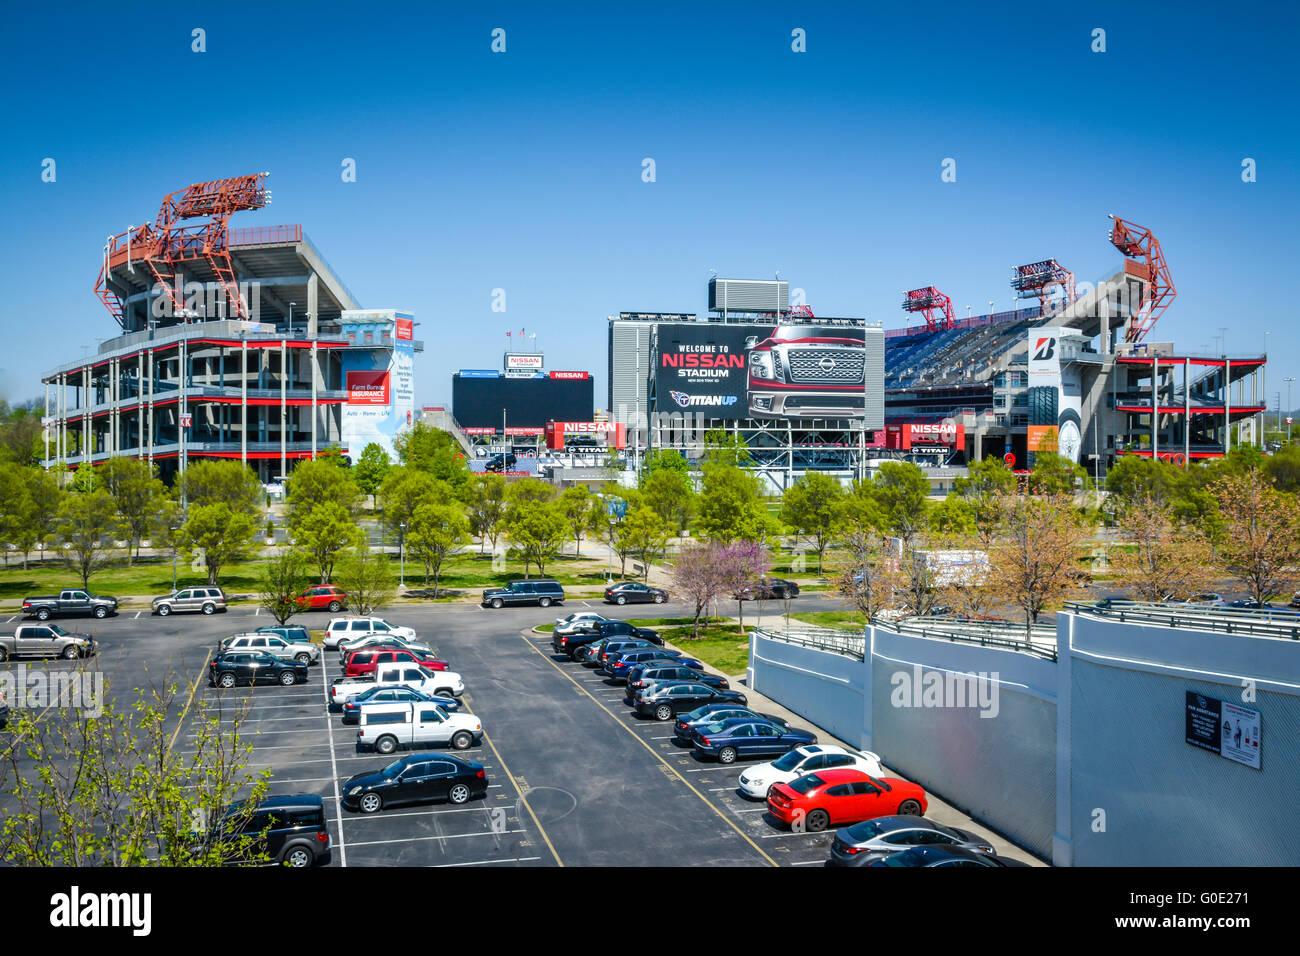 View from parking lot serving downtown Nashville and the NFL team Titans' Nissan stadium on the riverfront in Music City USA, TN Stock Photo